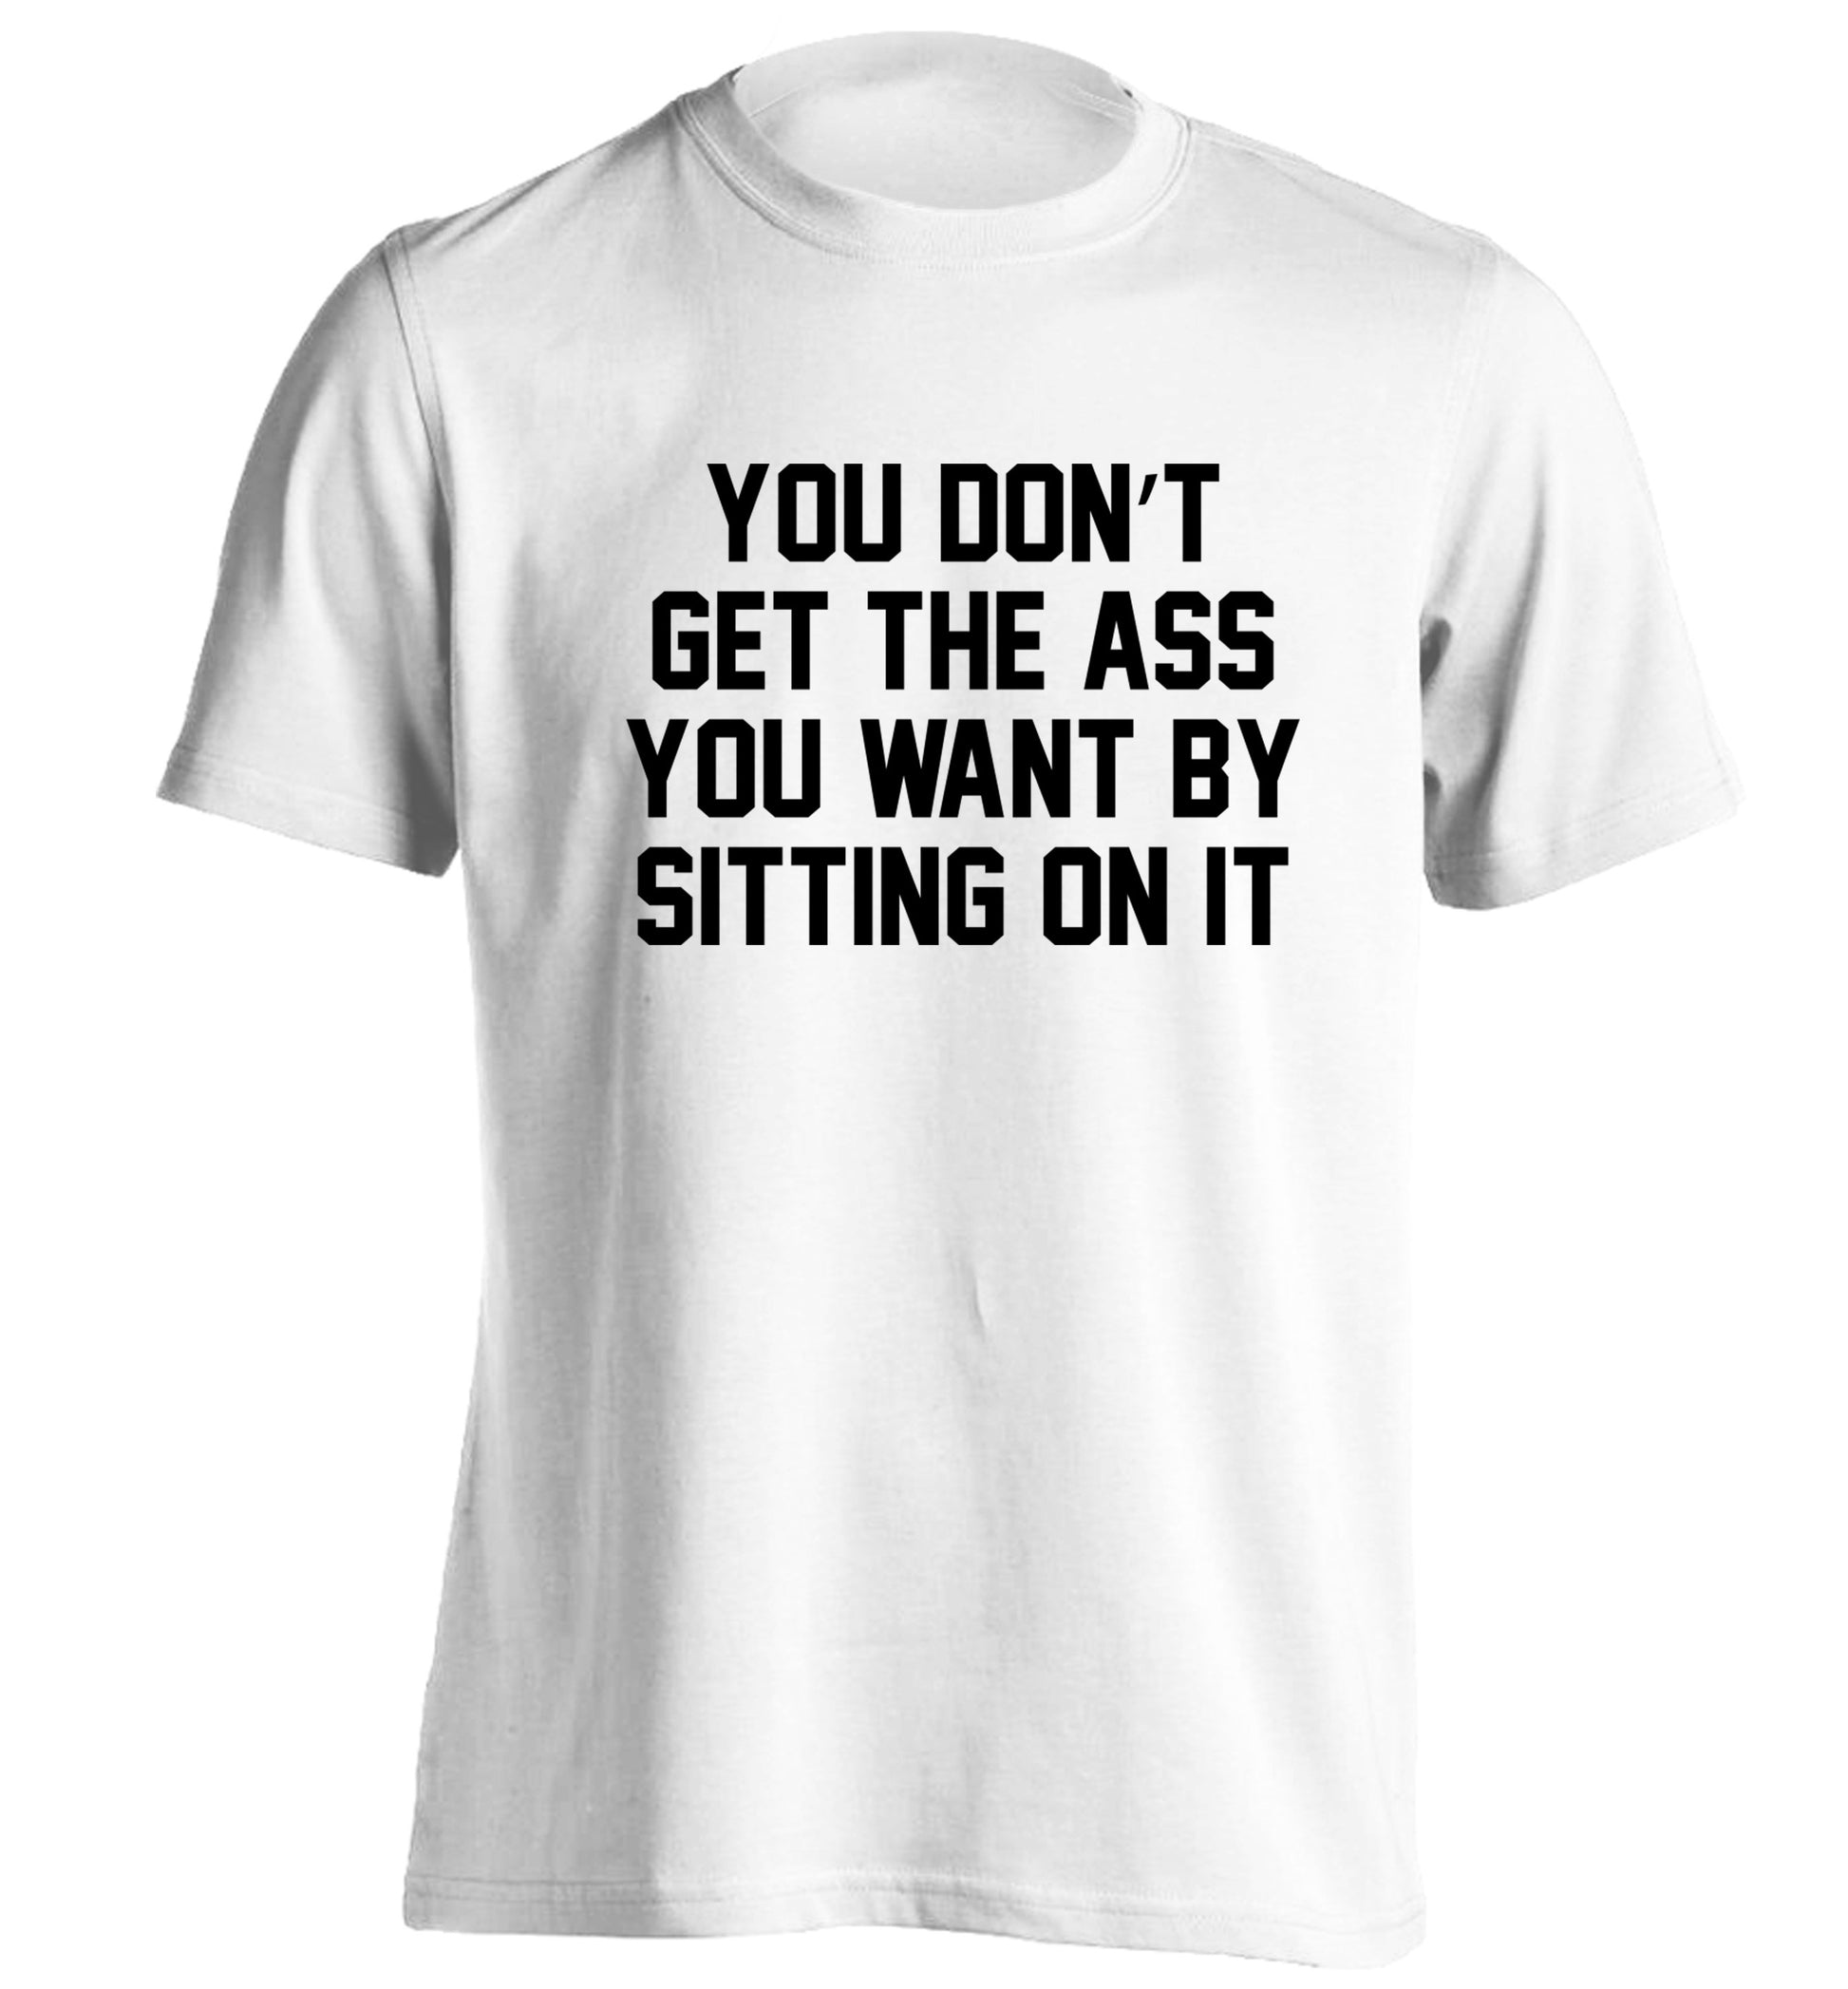 You don't get the ass you want by sitting on it adults unisex white Tshirt 2XL